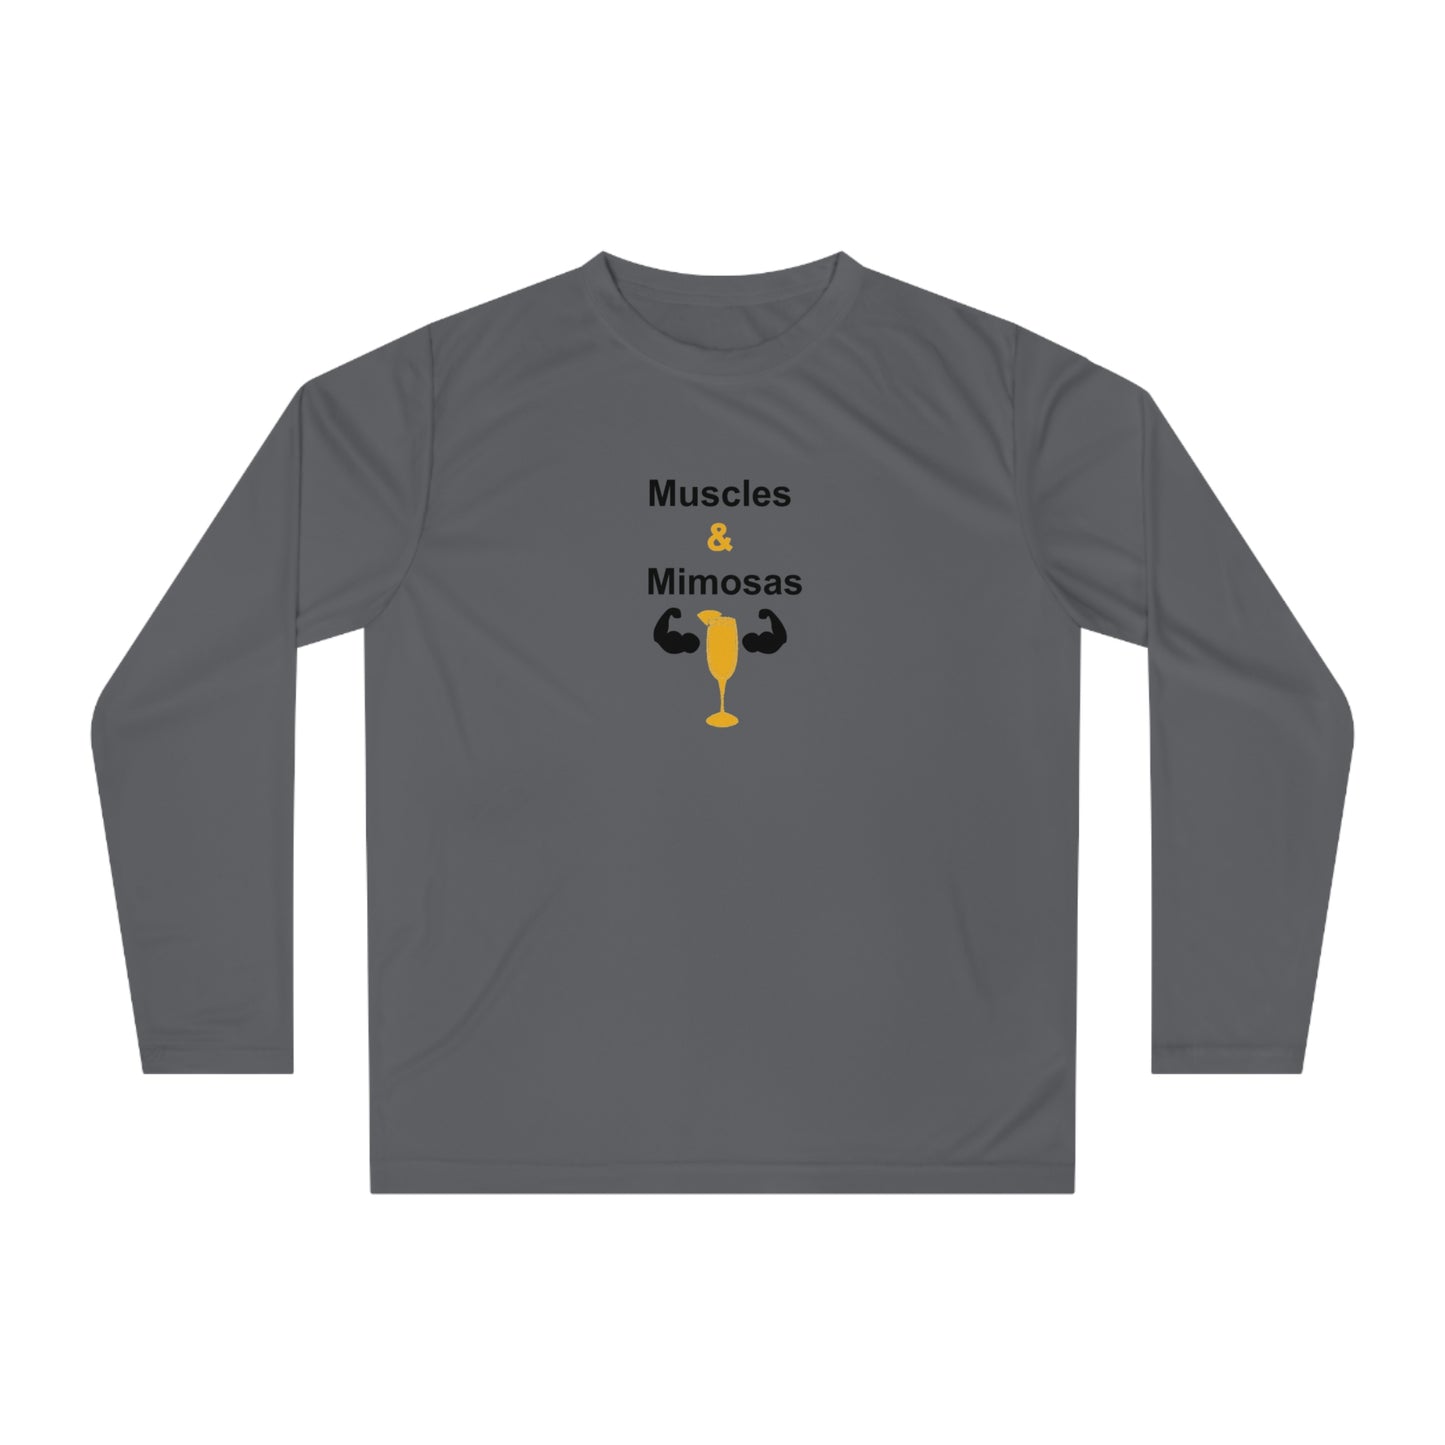 Muscles and Mimosas Performance Long Sleeve Shirt